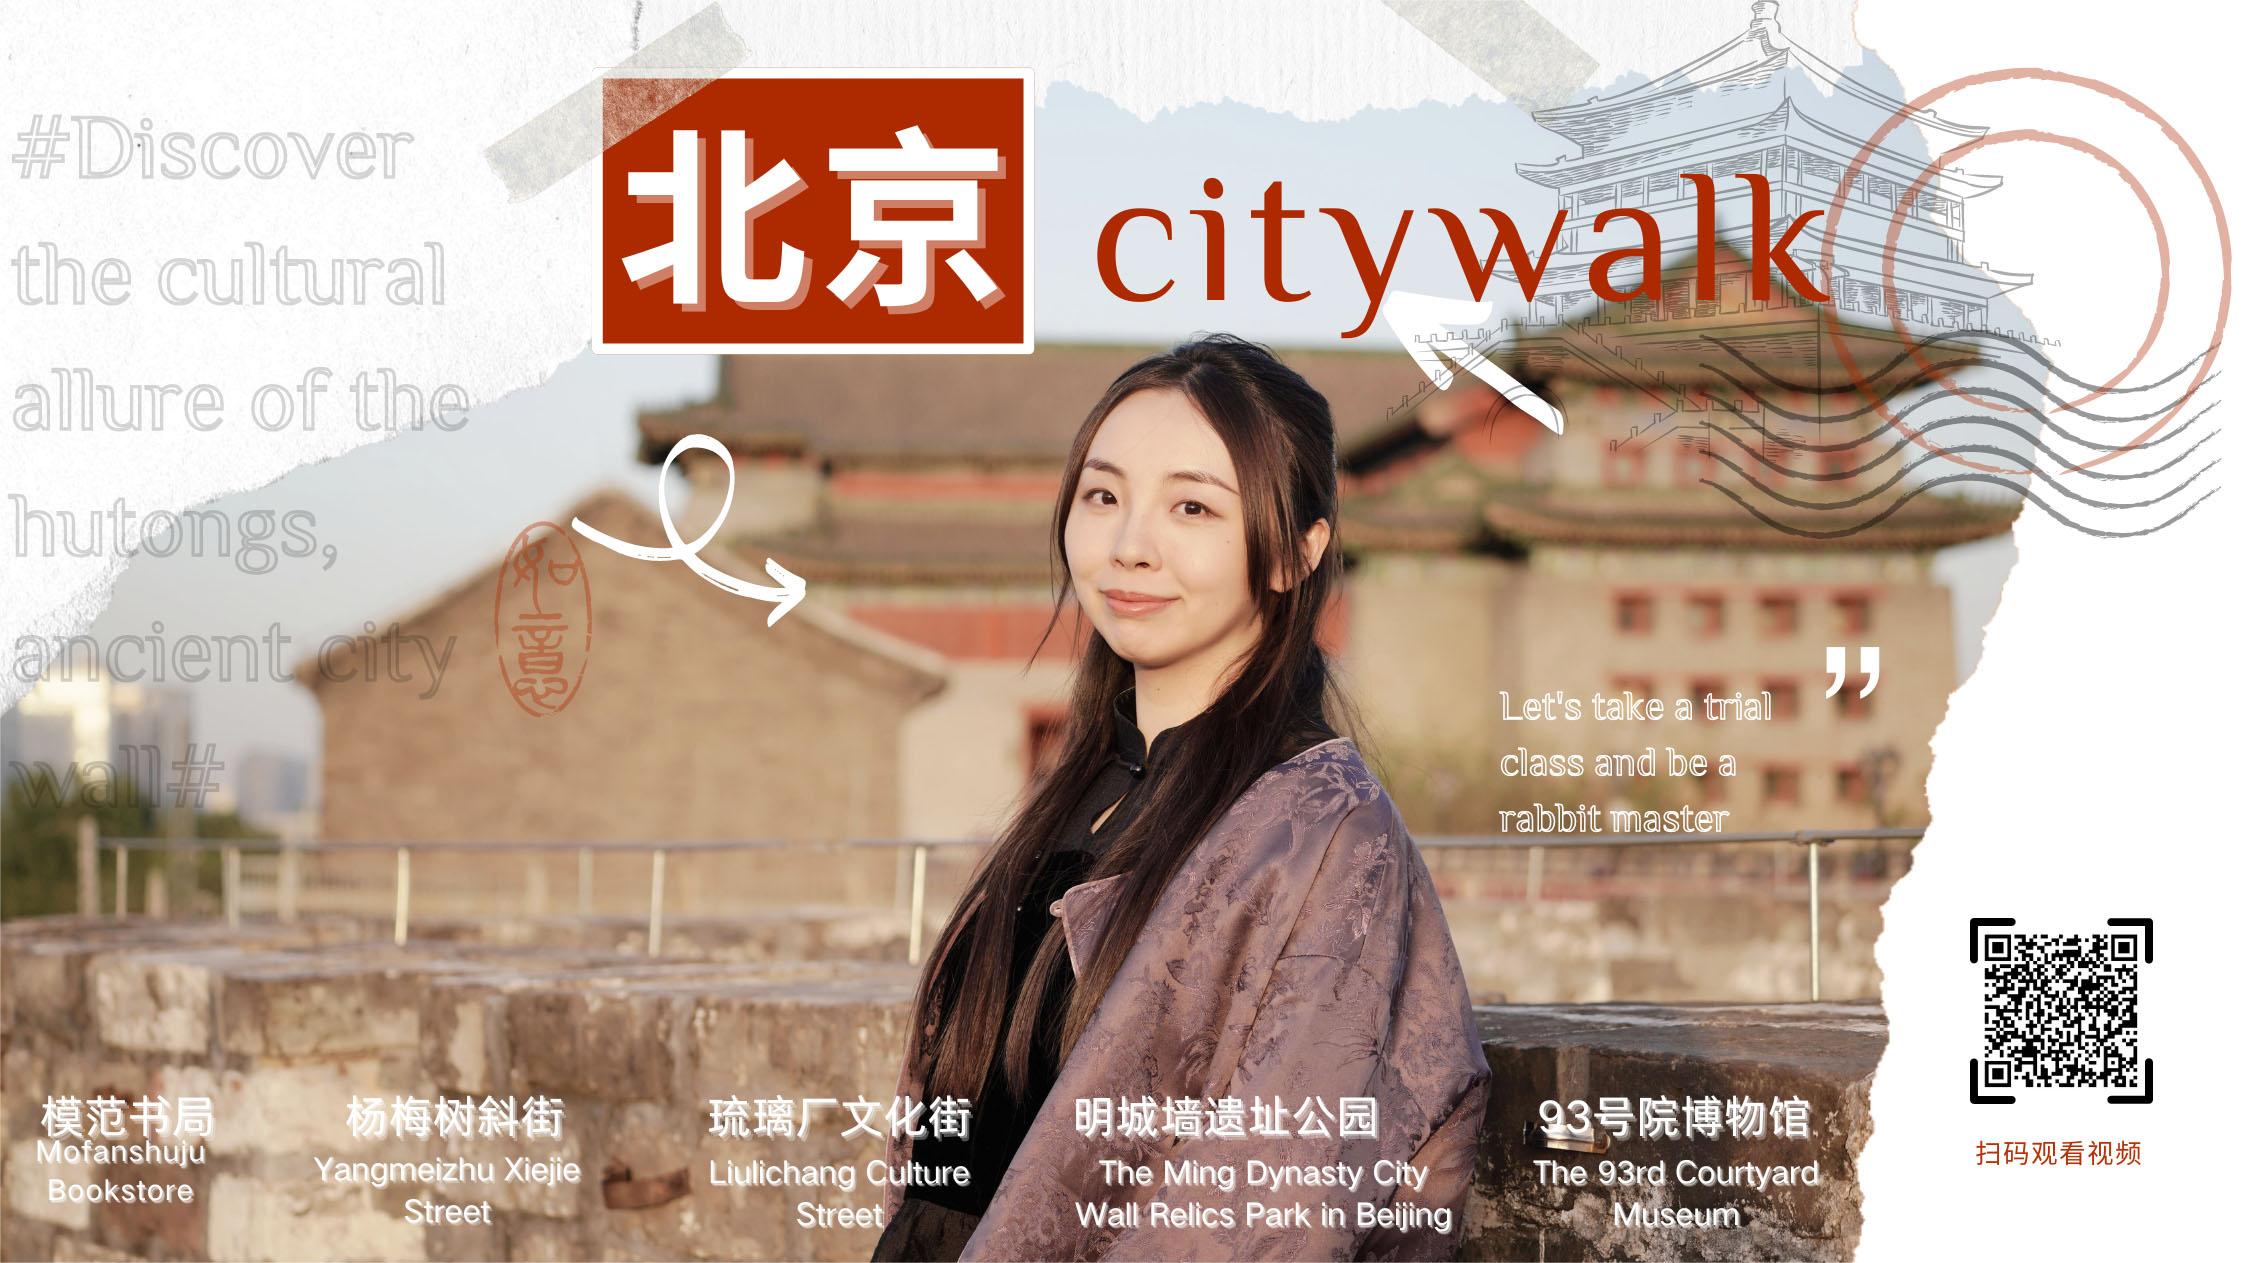 Beijing City Walk: Discover the cultural allure of the hutongs, ancient city wall